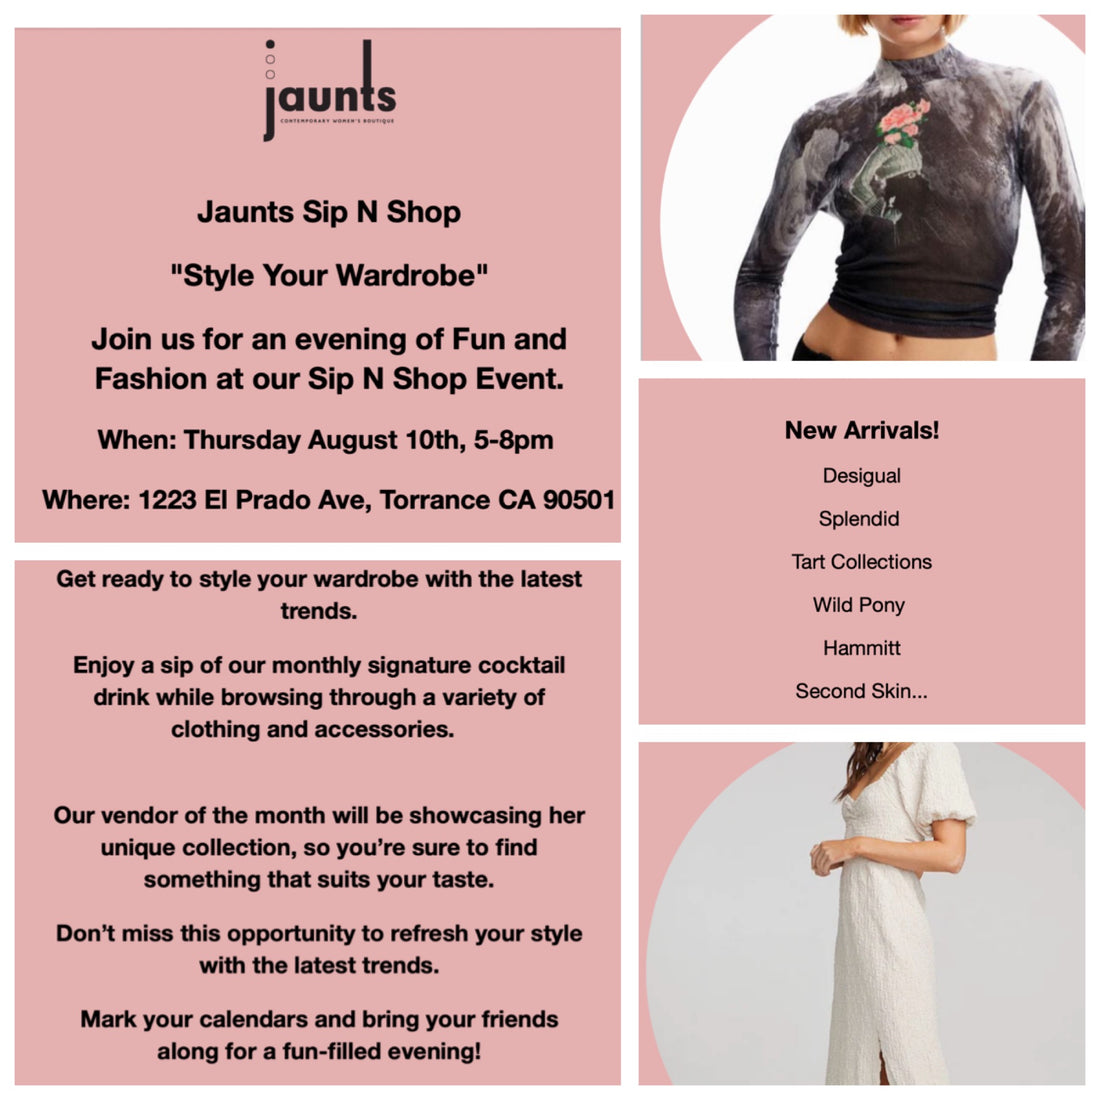 Join us for an evening of Fun and Fashion at our Sip N Shop Event. Thursday August 10th, 5-8pm